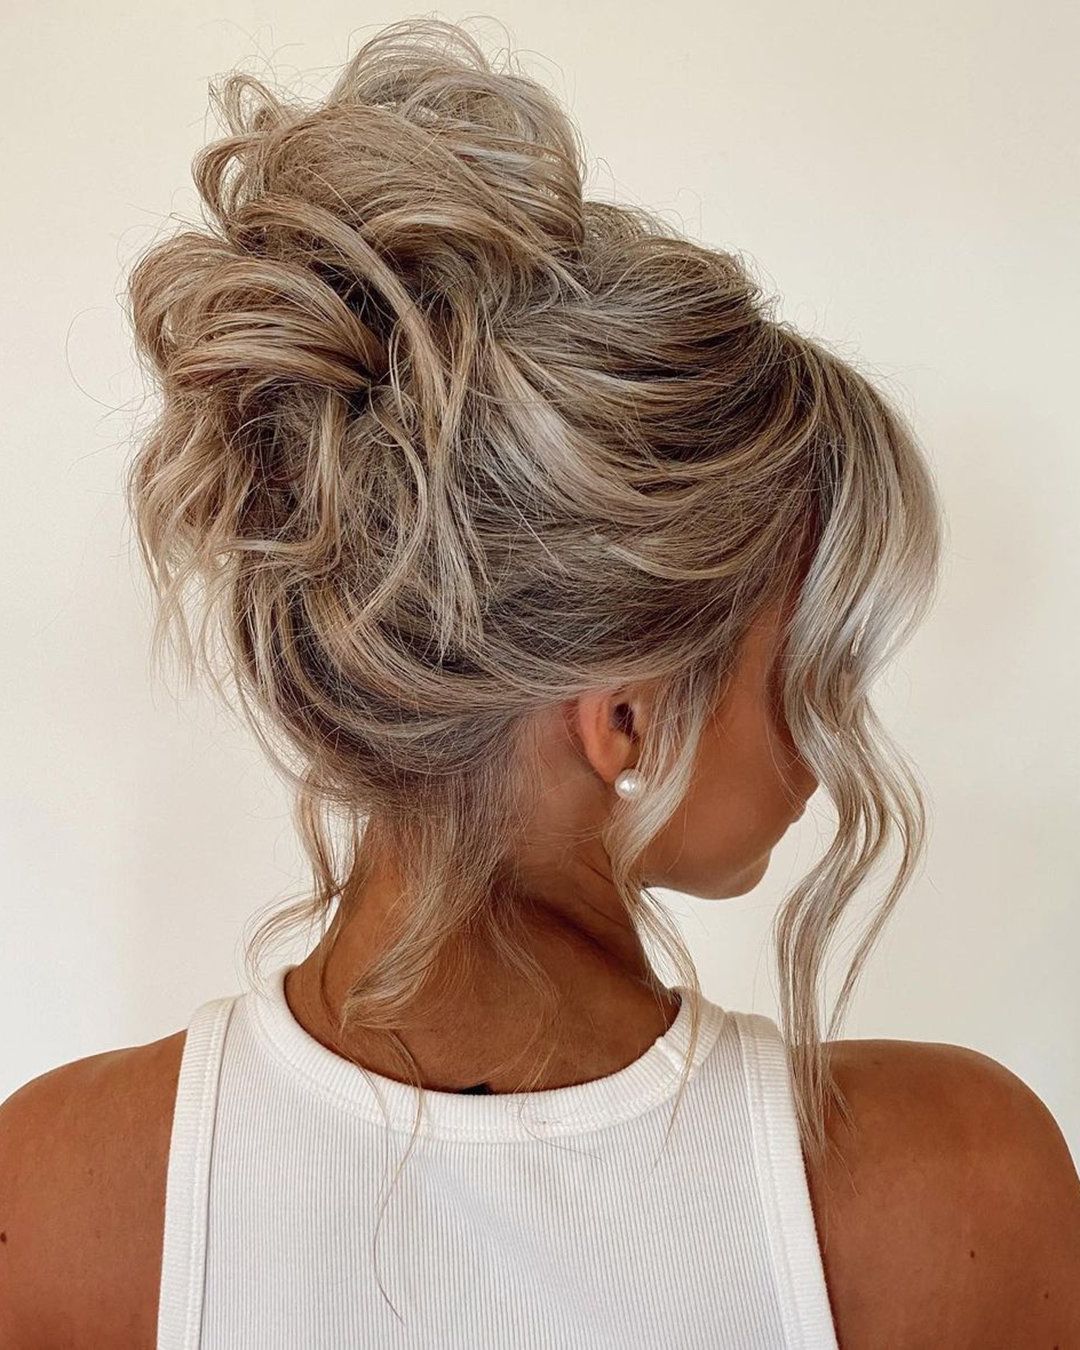 Well Liked Medium Hair Updos Hairstyles With Wedding Hairstyles For Medium Length Hair: 40+ Best Looks (Gallery 20 of 20)